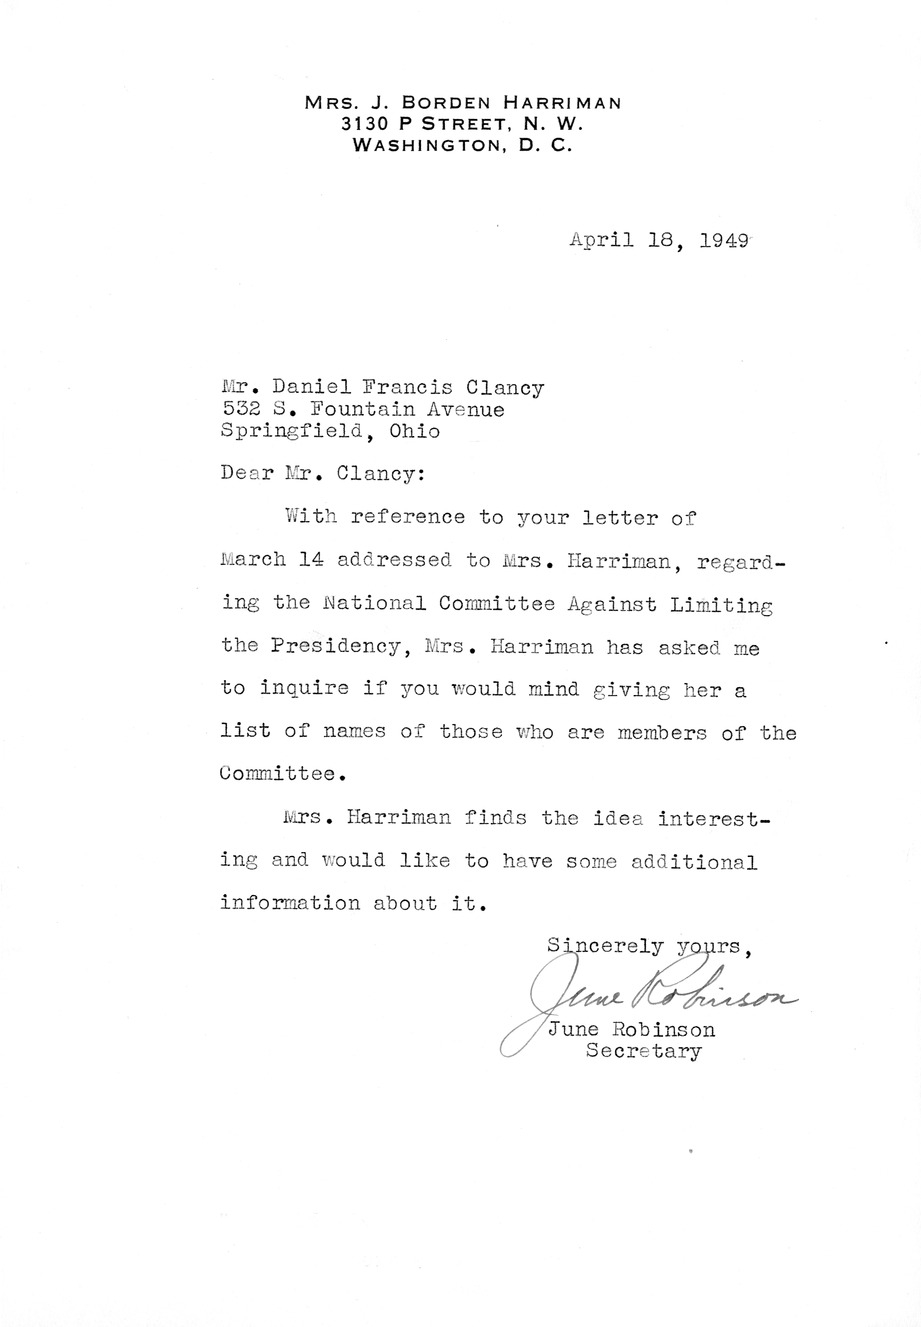 Letter from June Robinson to Daniel F. Clancy